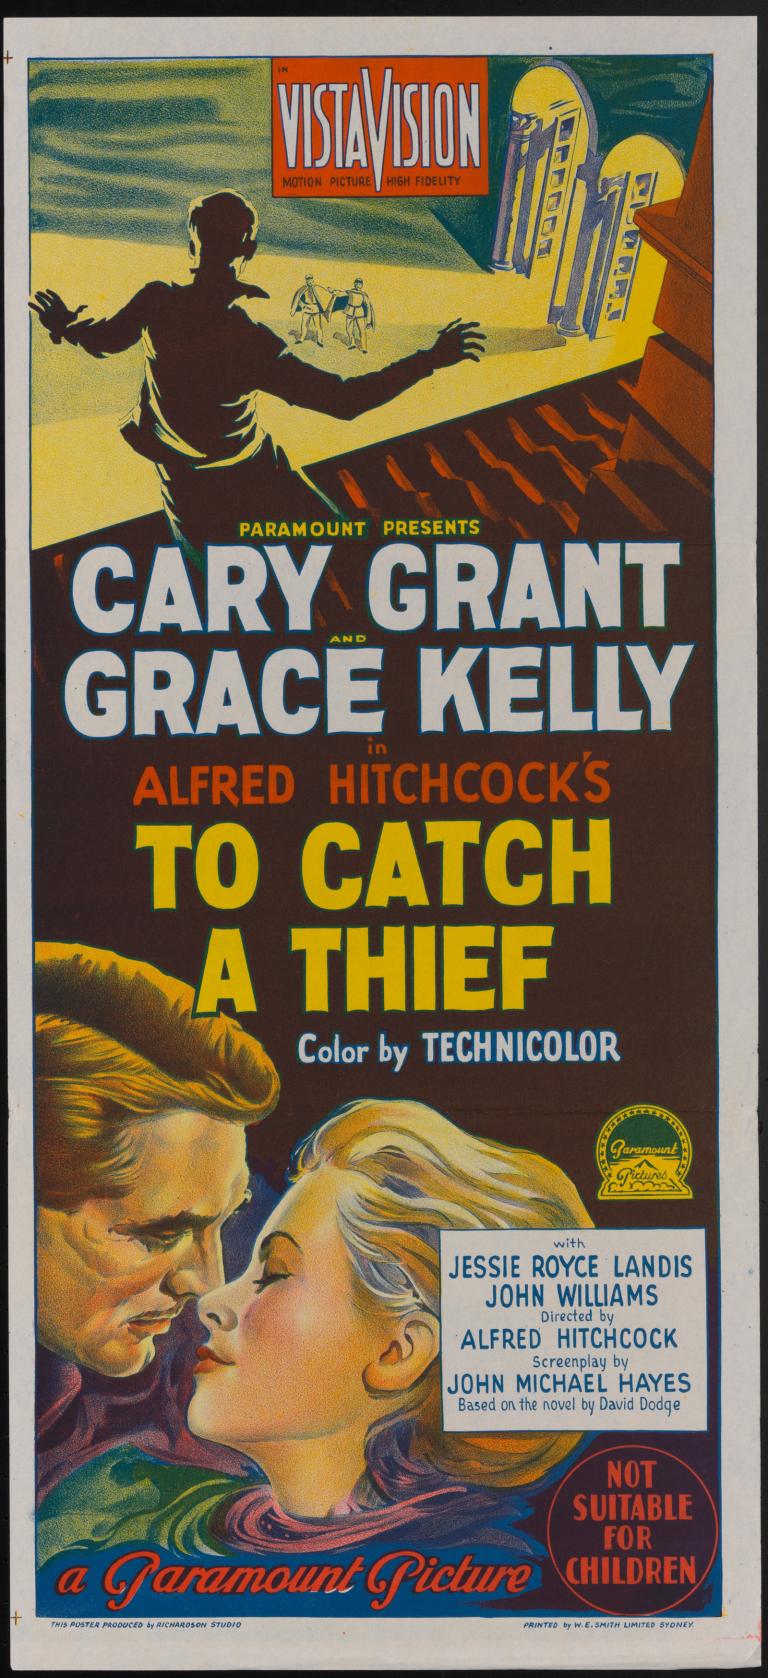 poster for a film titled To Catch a Thief starring Cary Grant and Grace Kelly